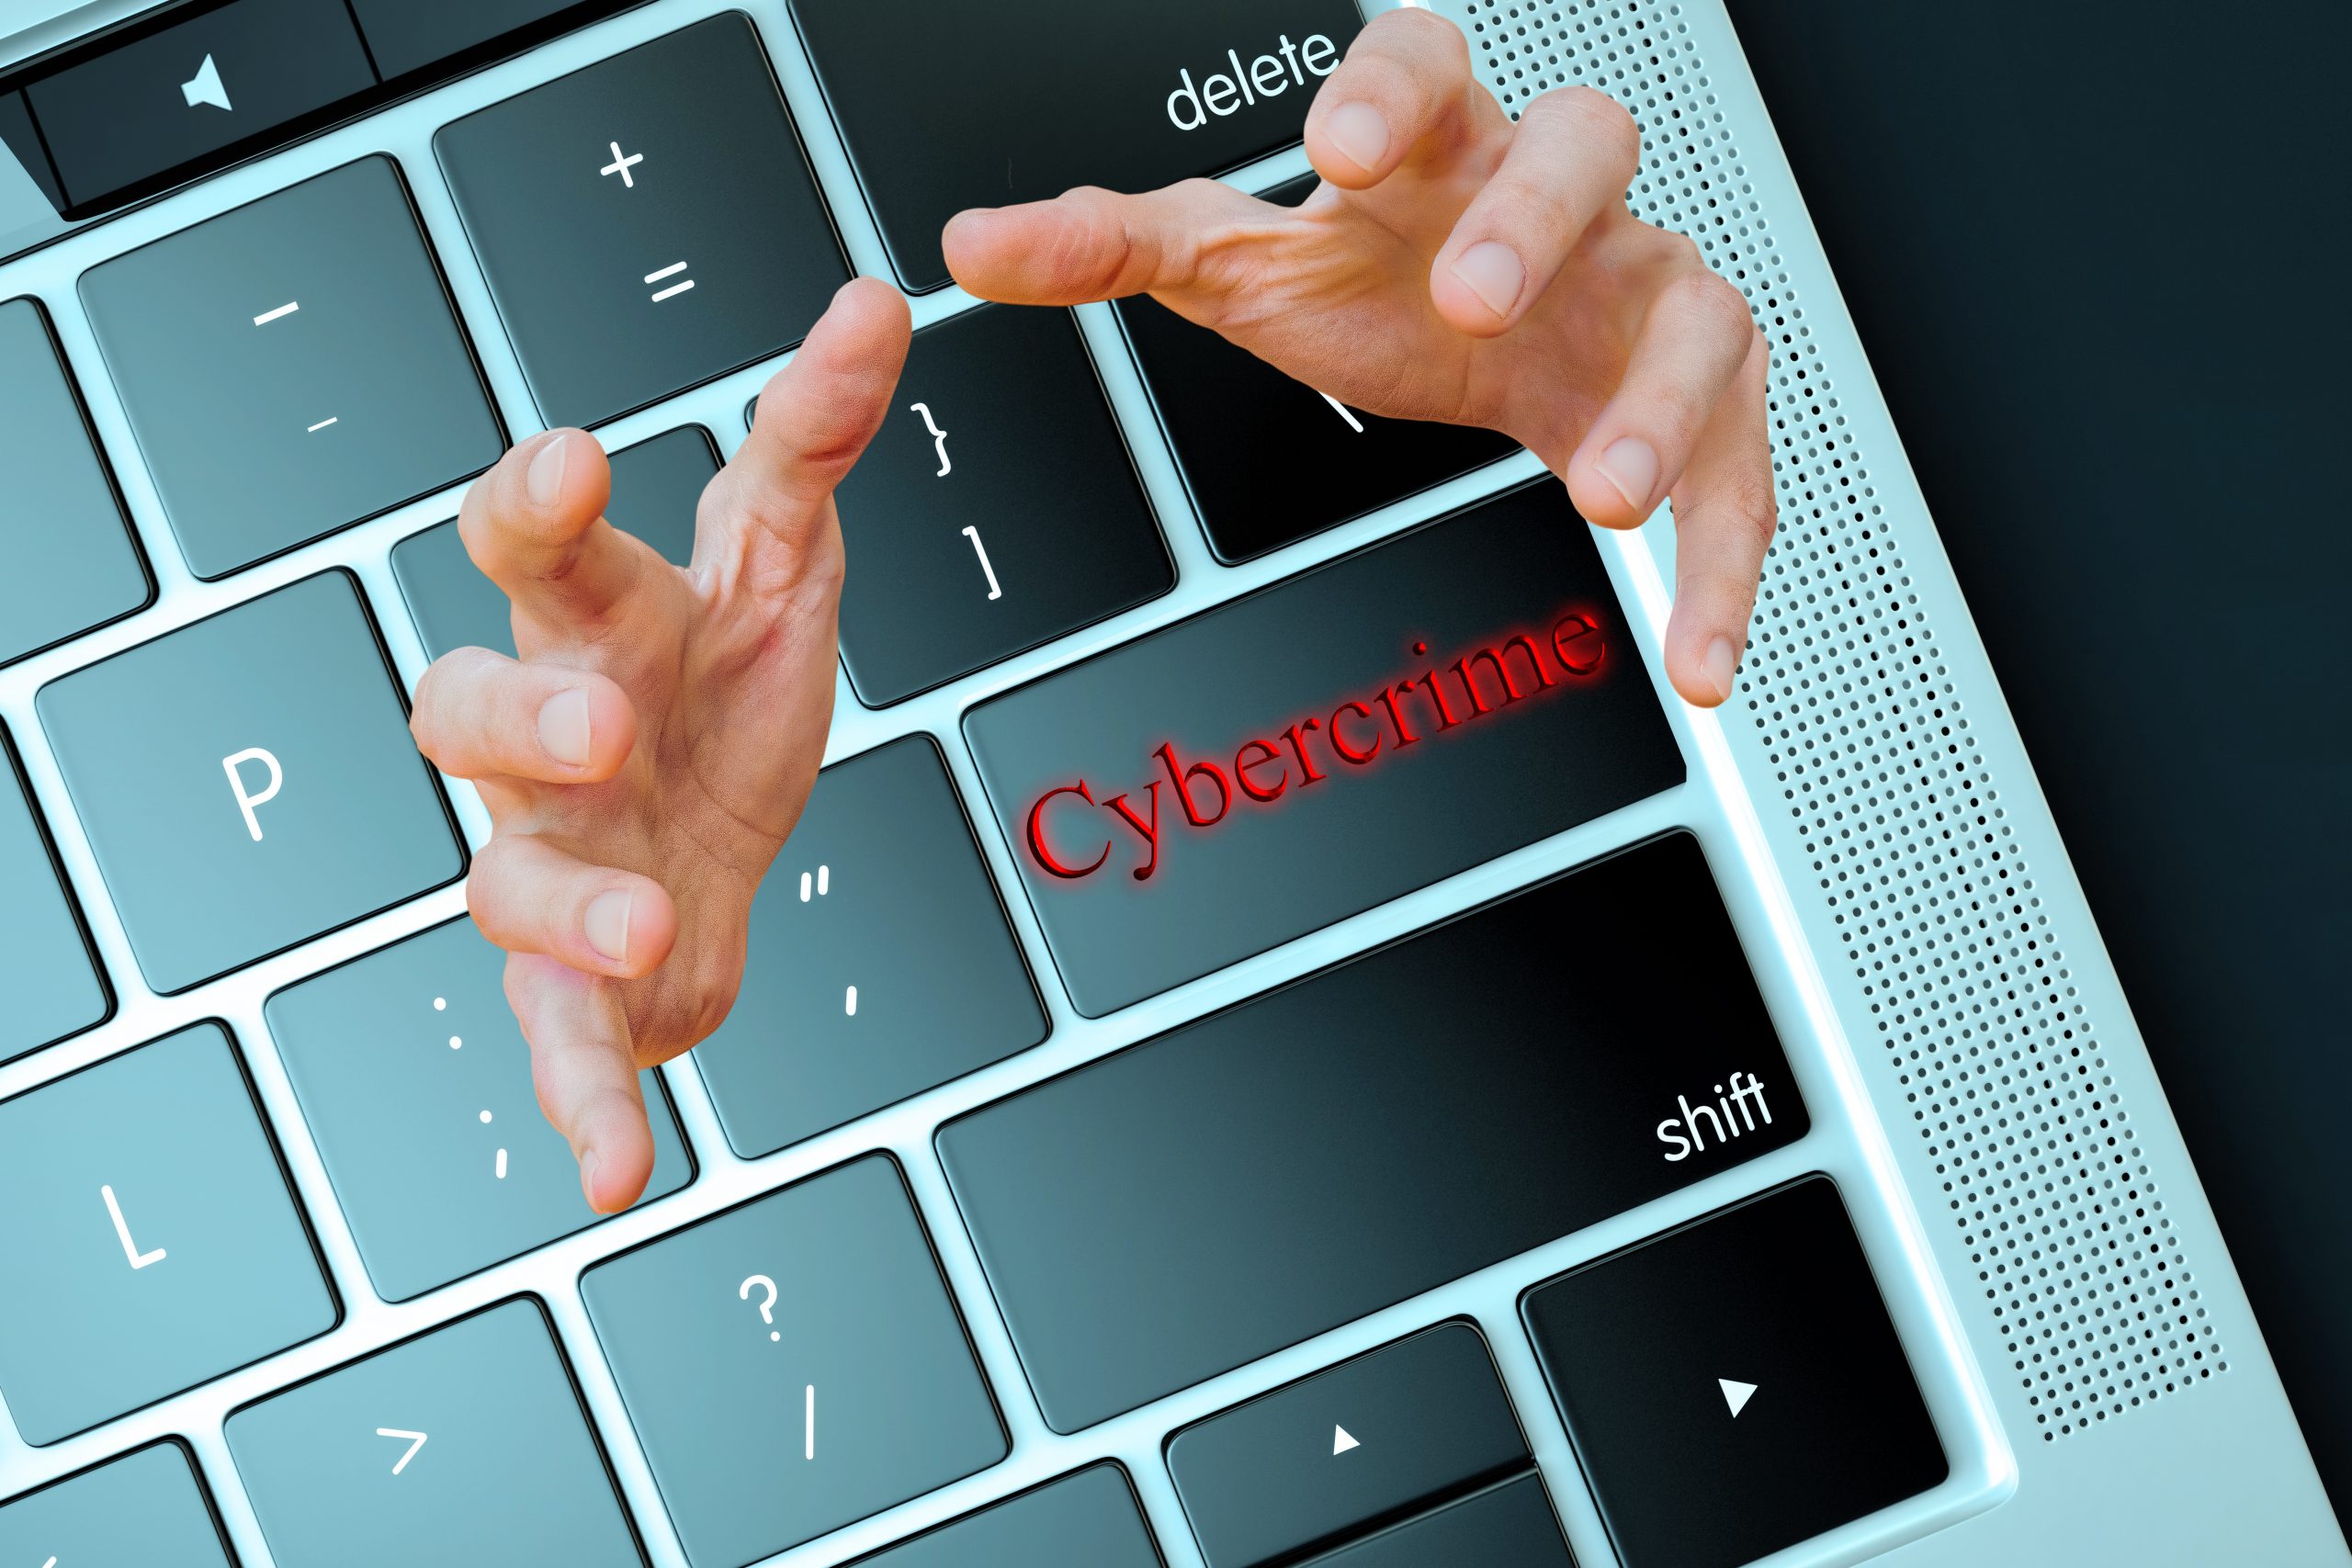 Cyber crime goes up by over 6% in Spain in 2021